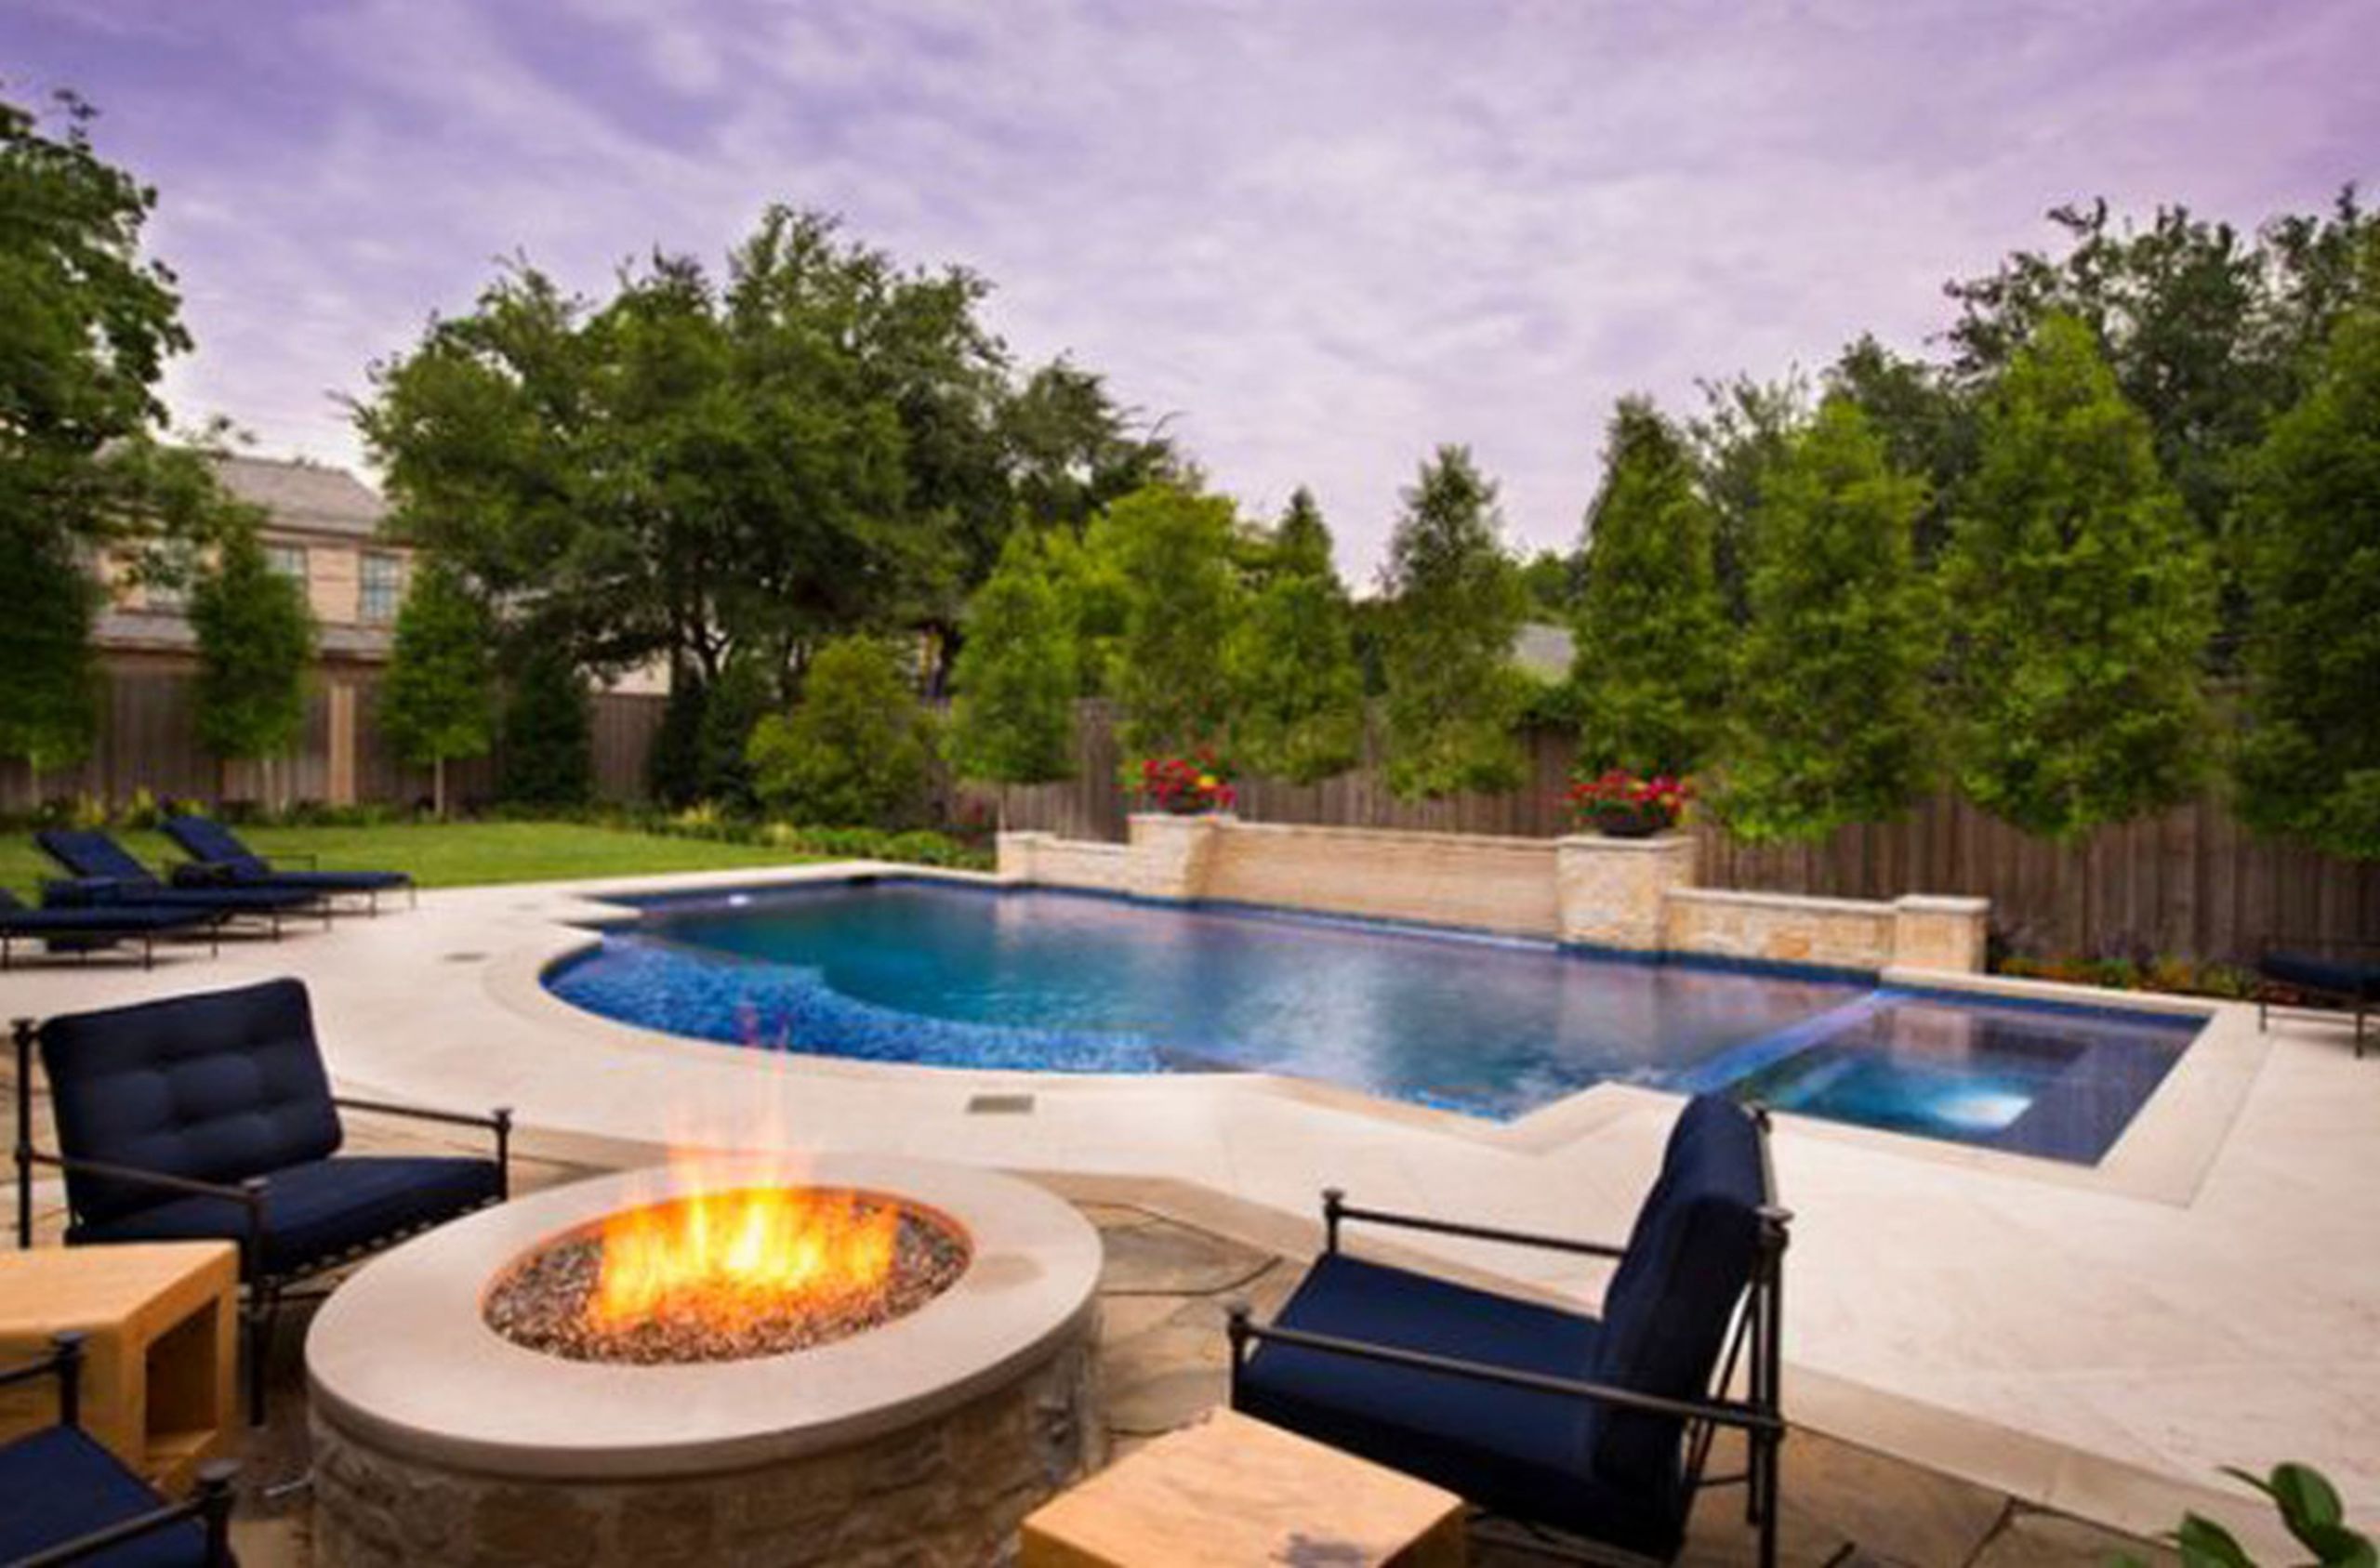 Backyard Pool Ideas
 Backyard Pool Design with Mesmerizing Effect for Your Home